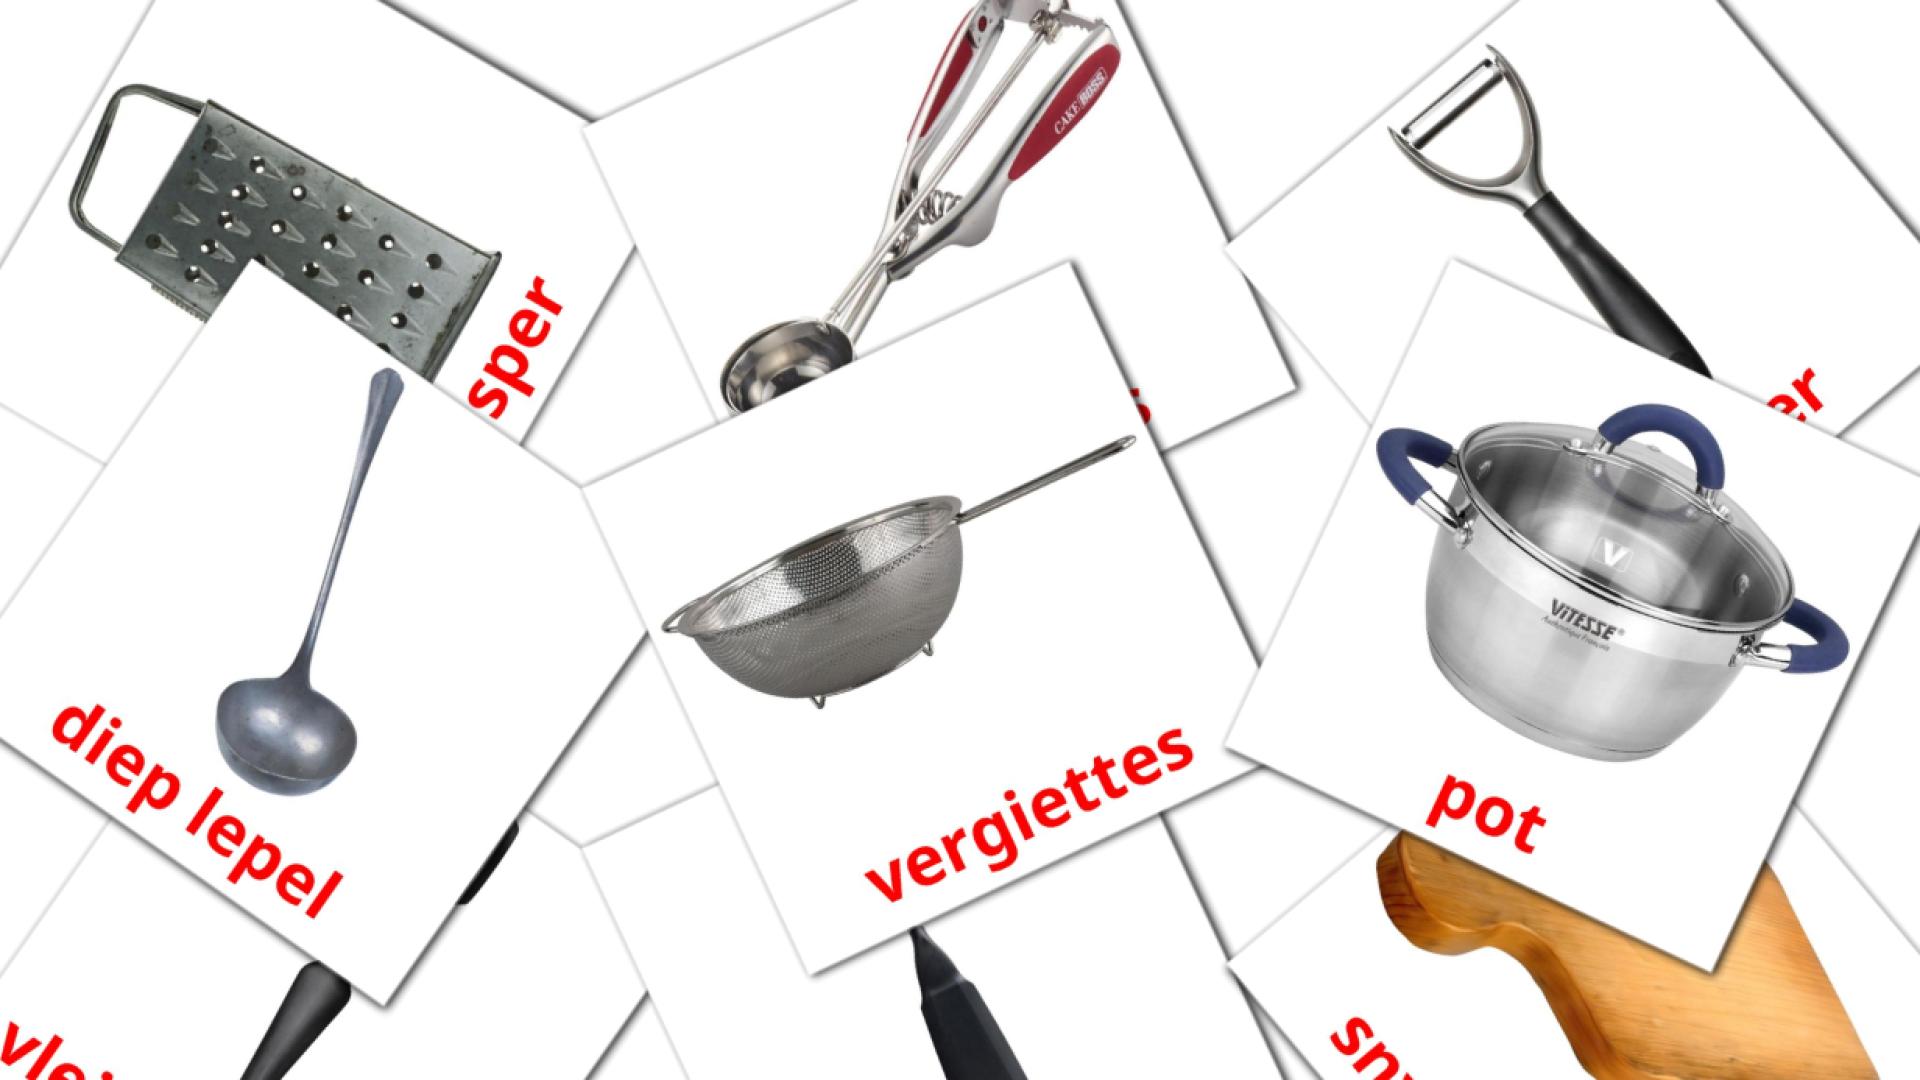 Kitchenware - afrikaans vocabulary cards